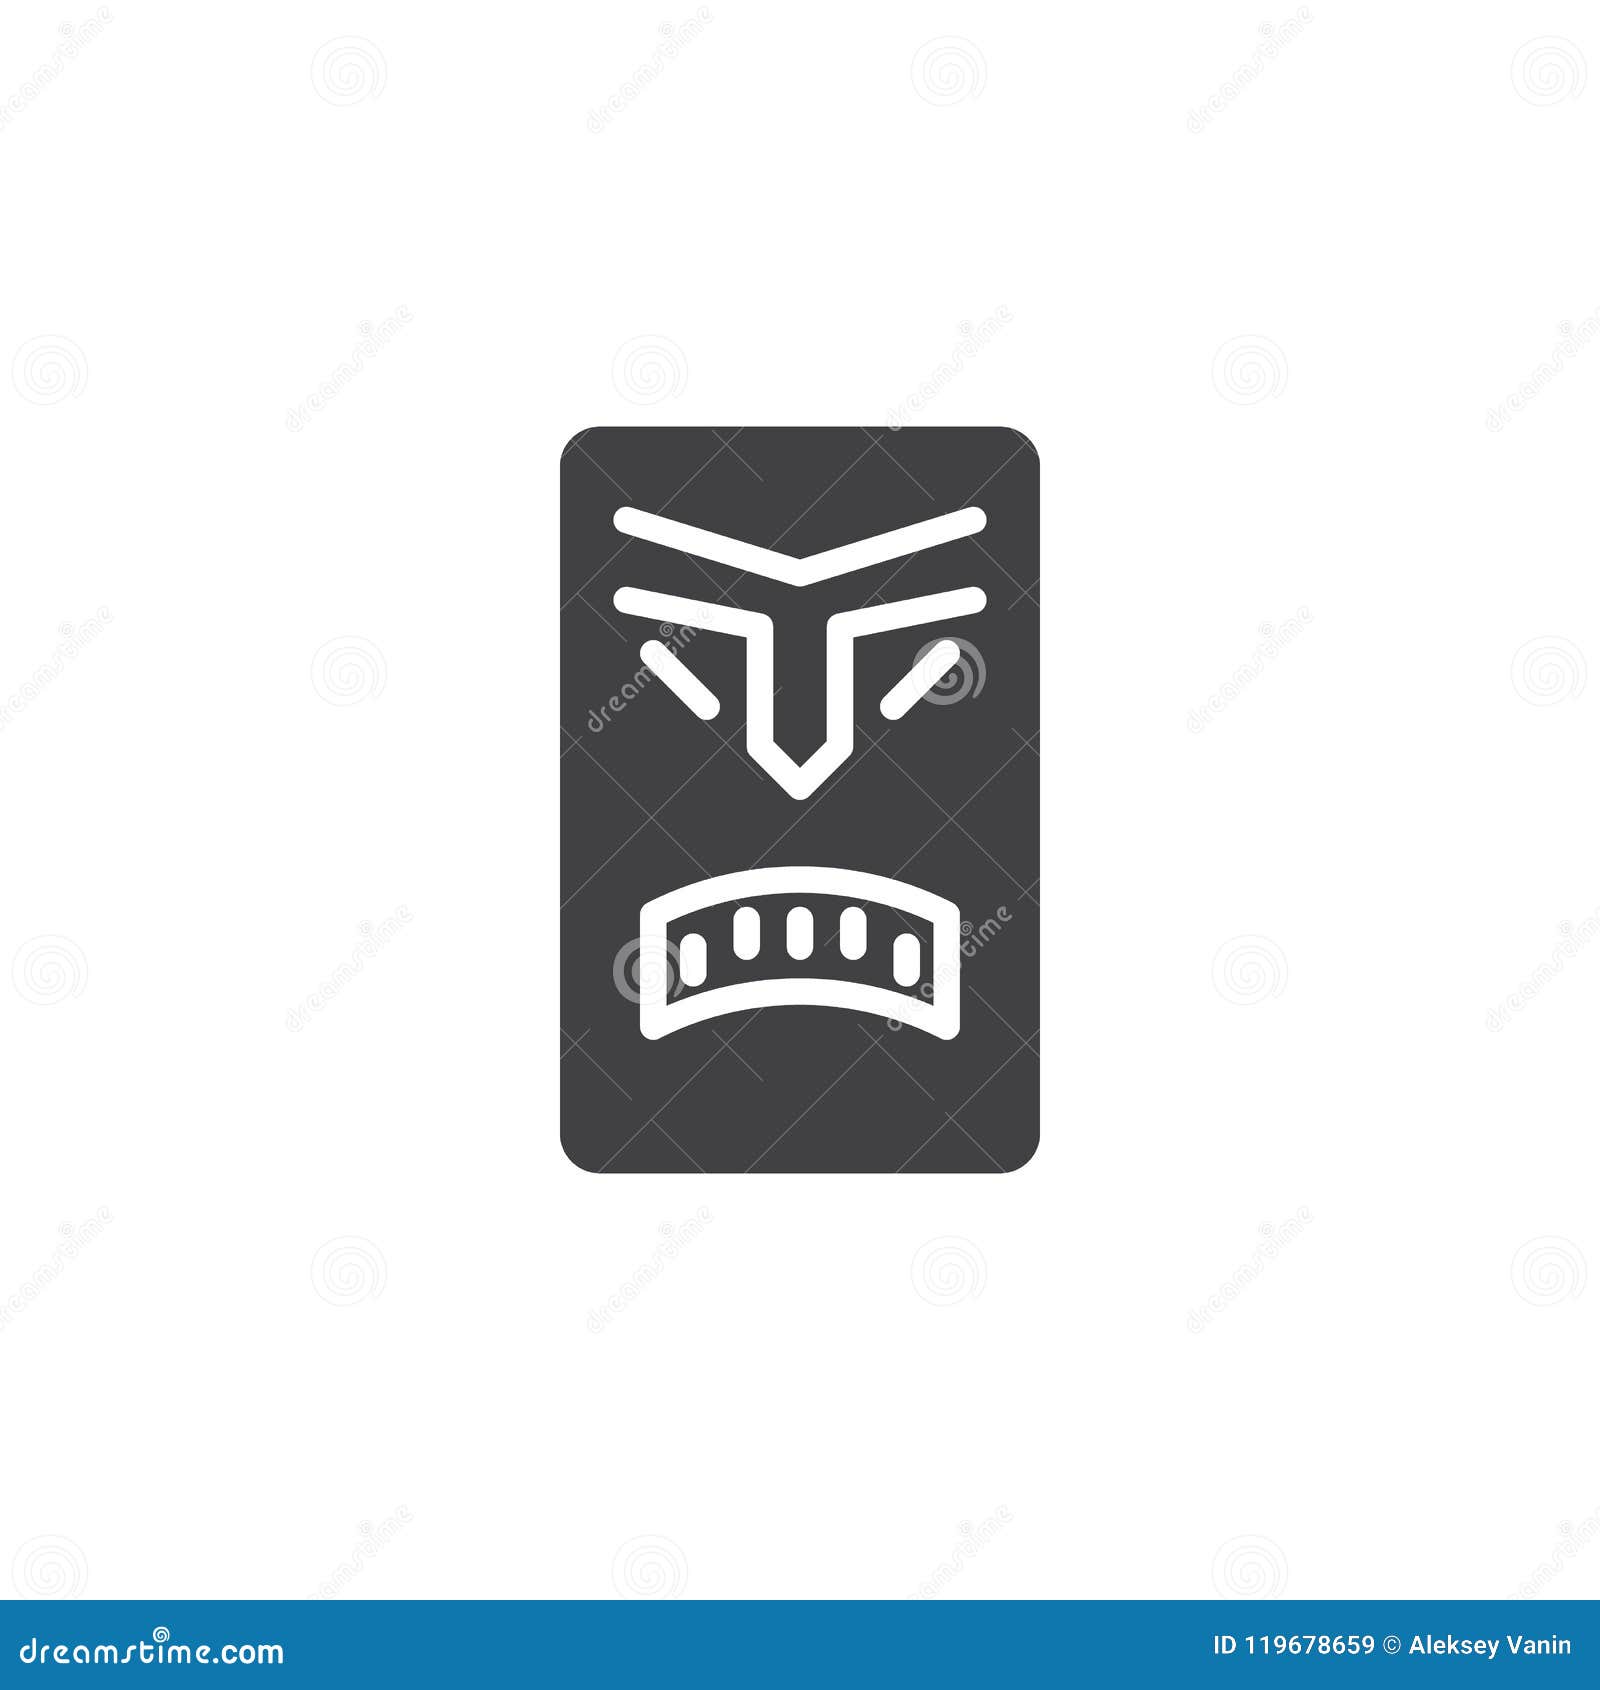 Tiki mask vector icon stock vector. Illustration of culture - 119678659